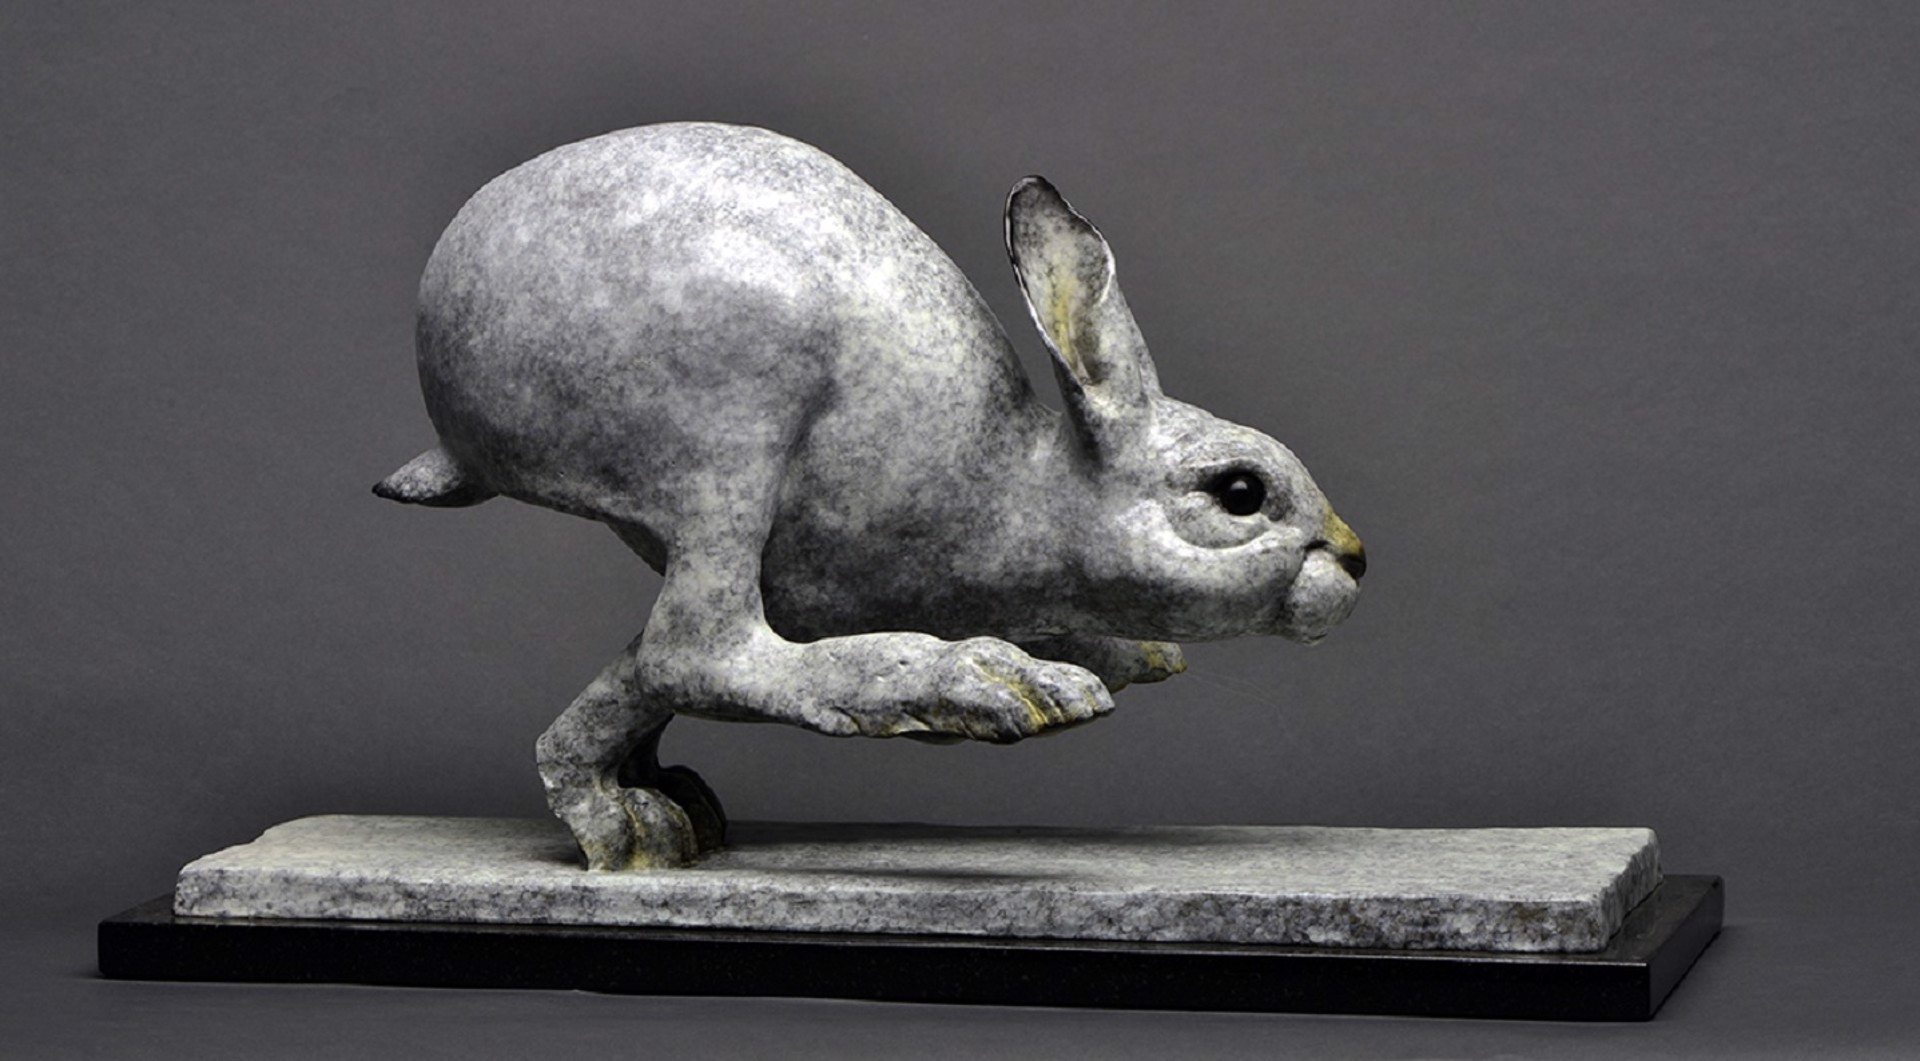 A Fine Art Sculpture In Bronze By Jeremy Bradshaw Featuring A Hare Running, Available At Gallery Wild